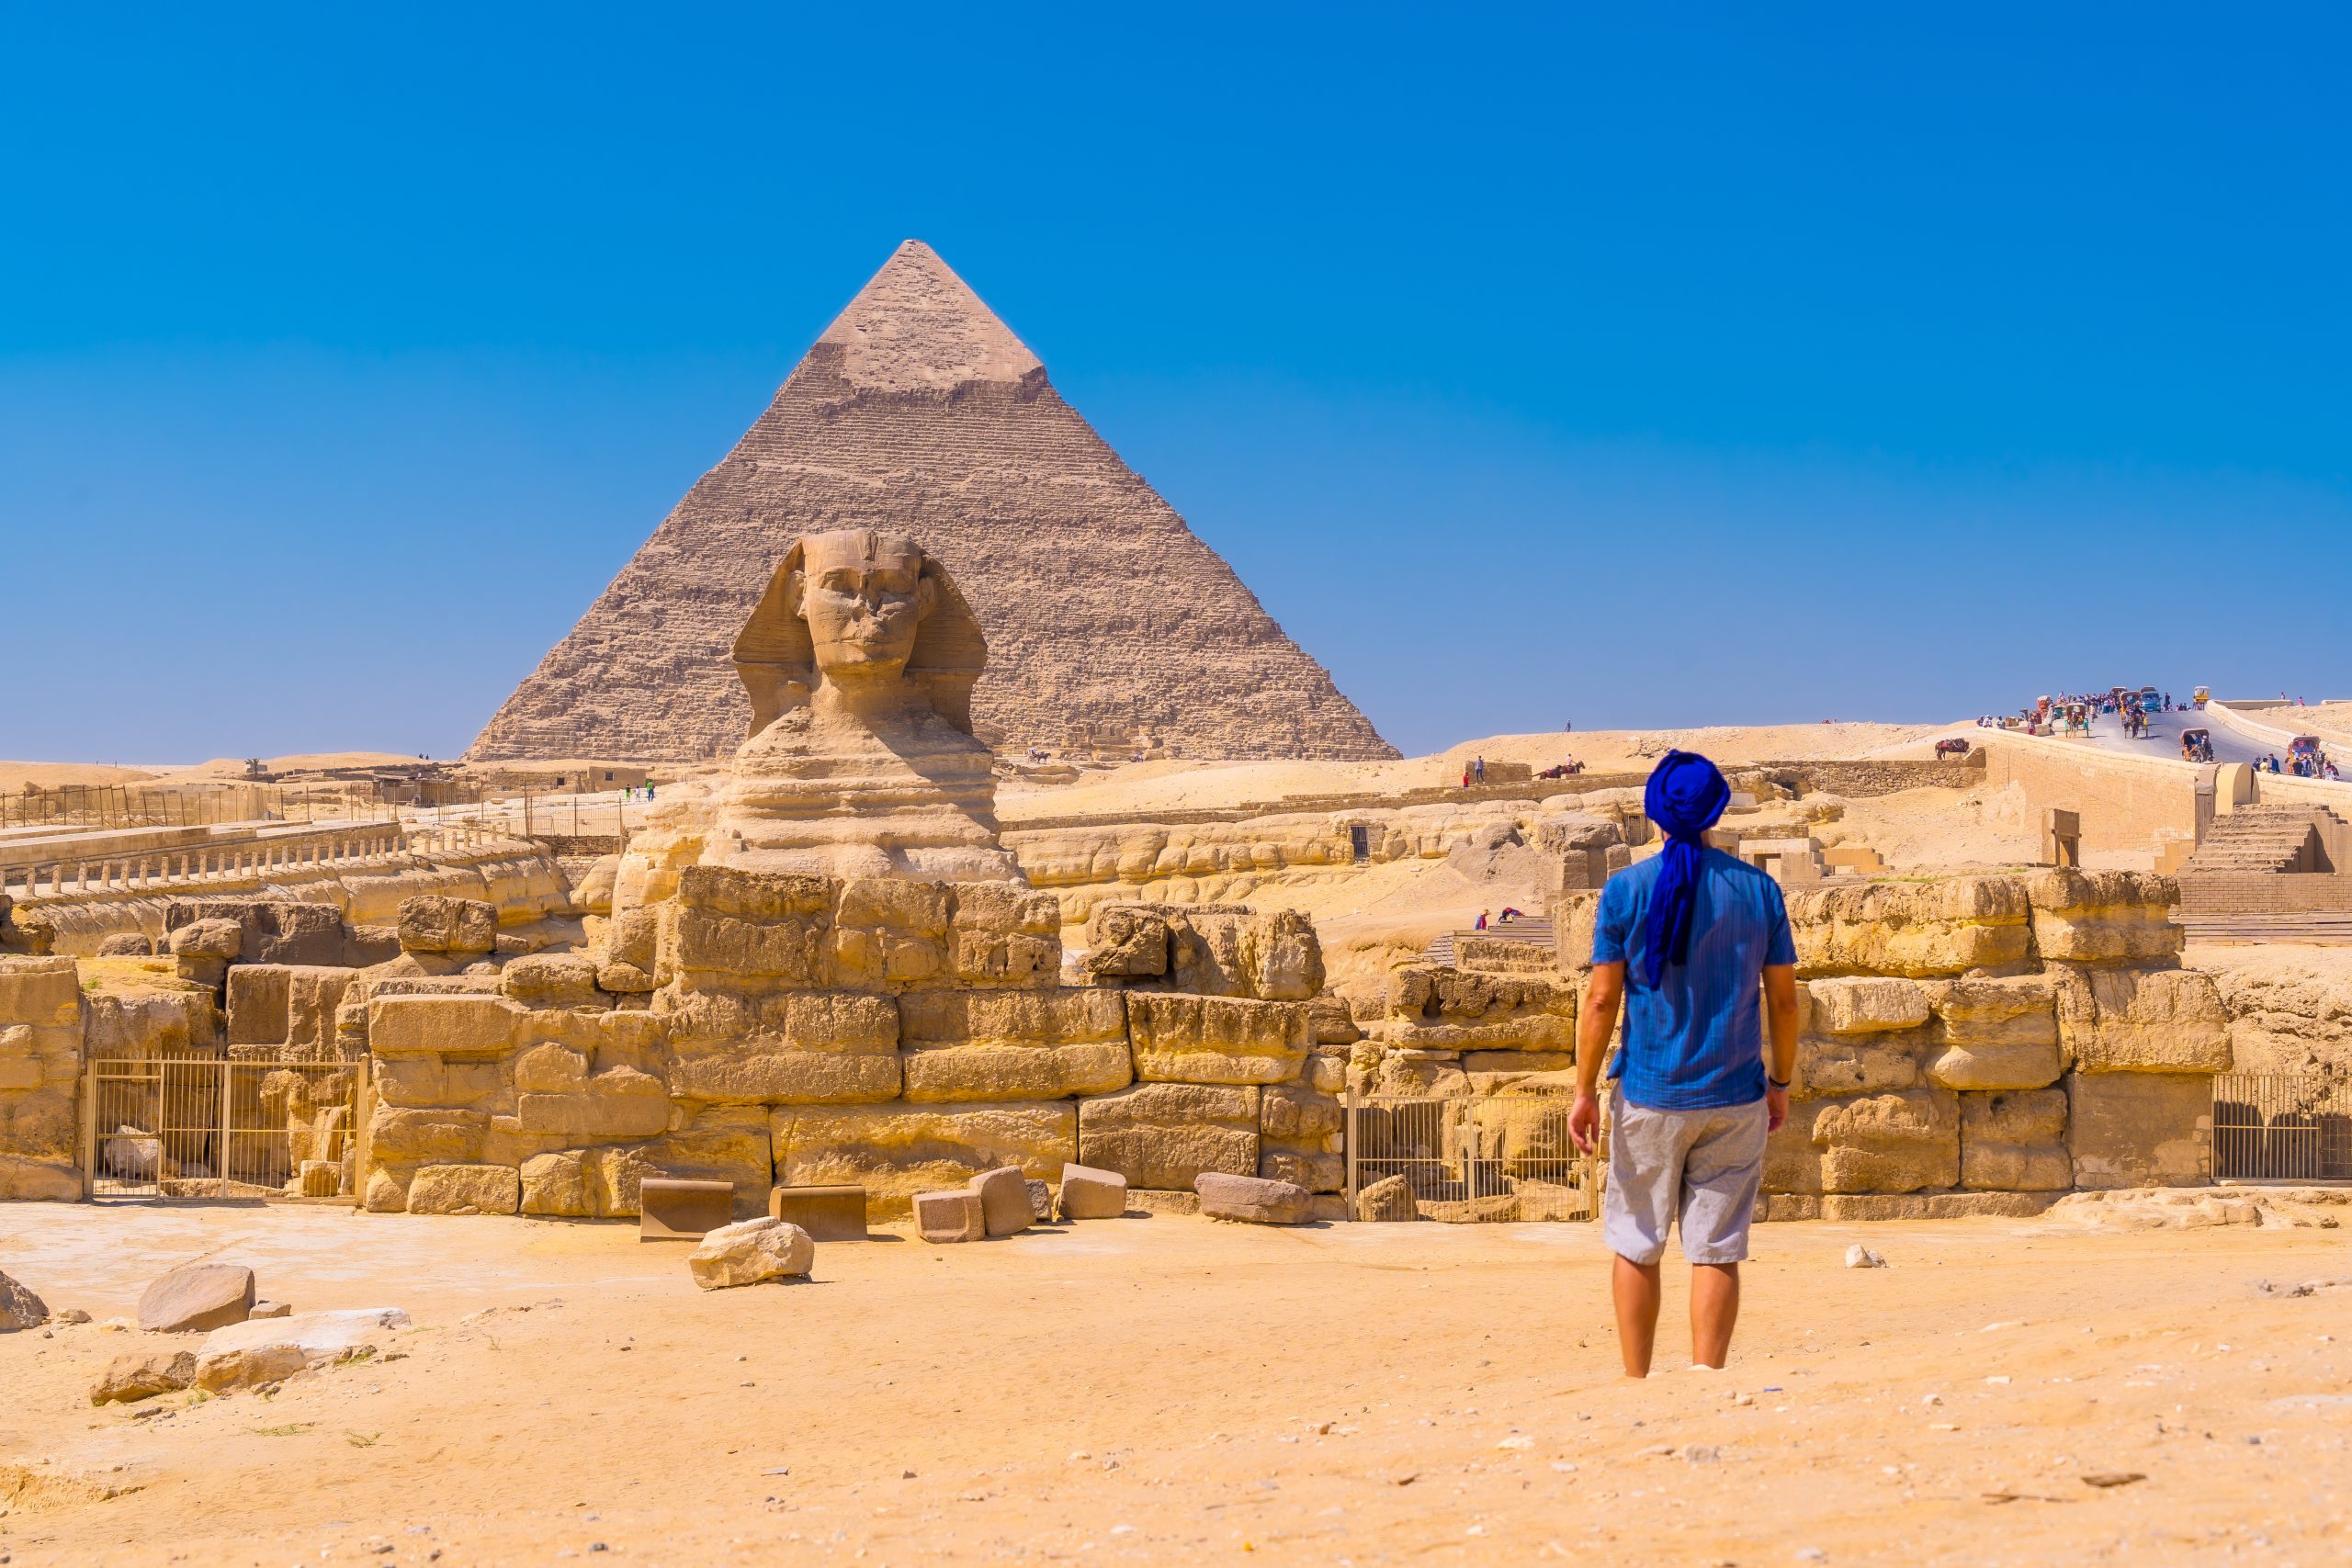 10 Common Mistakes to Avoid When Traveling in Egypt